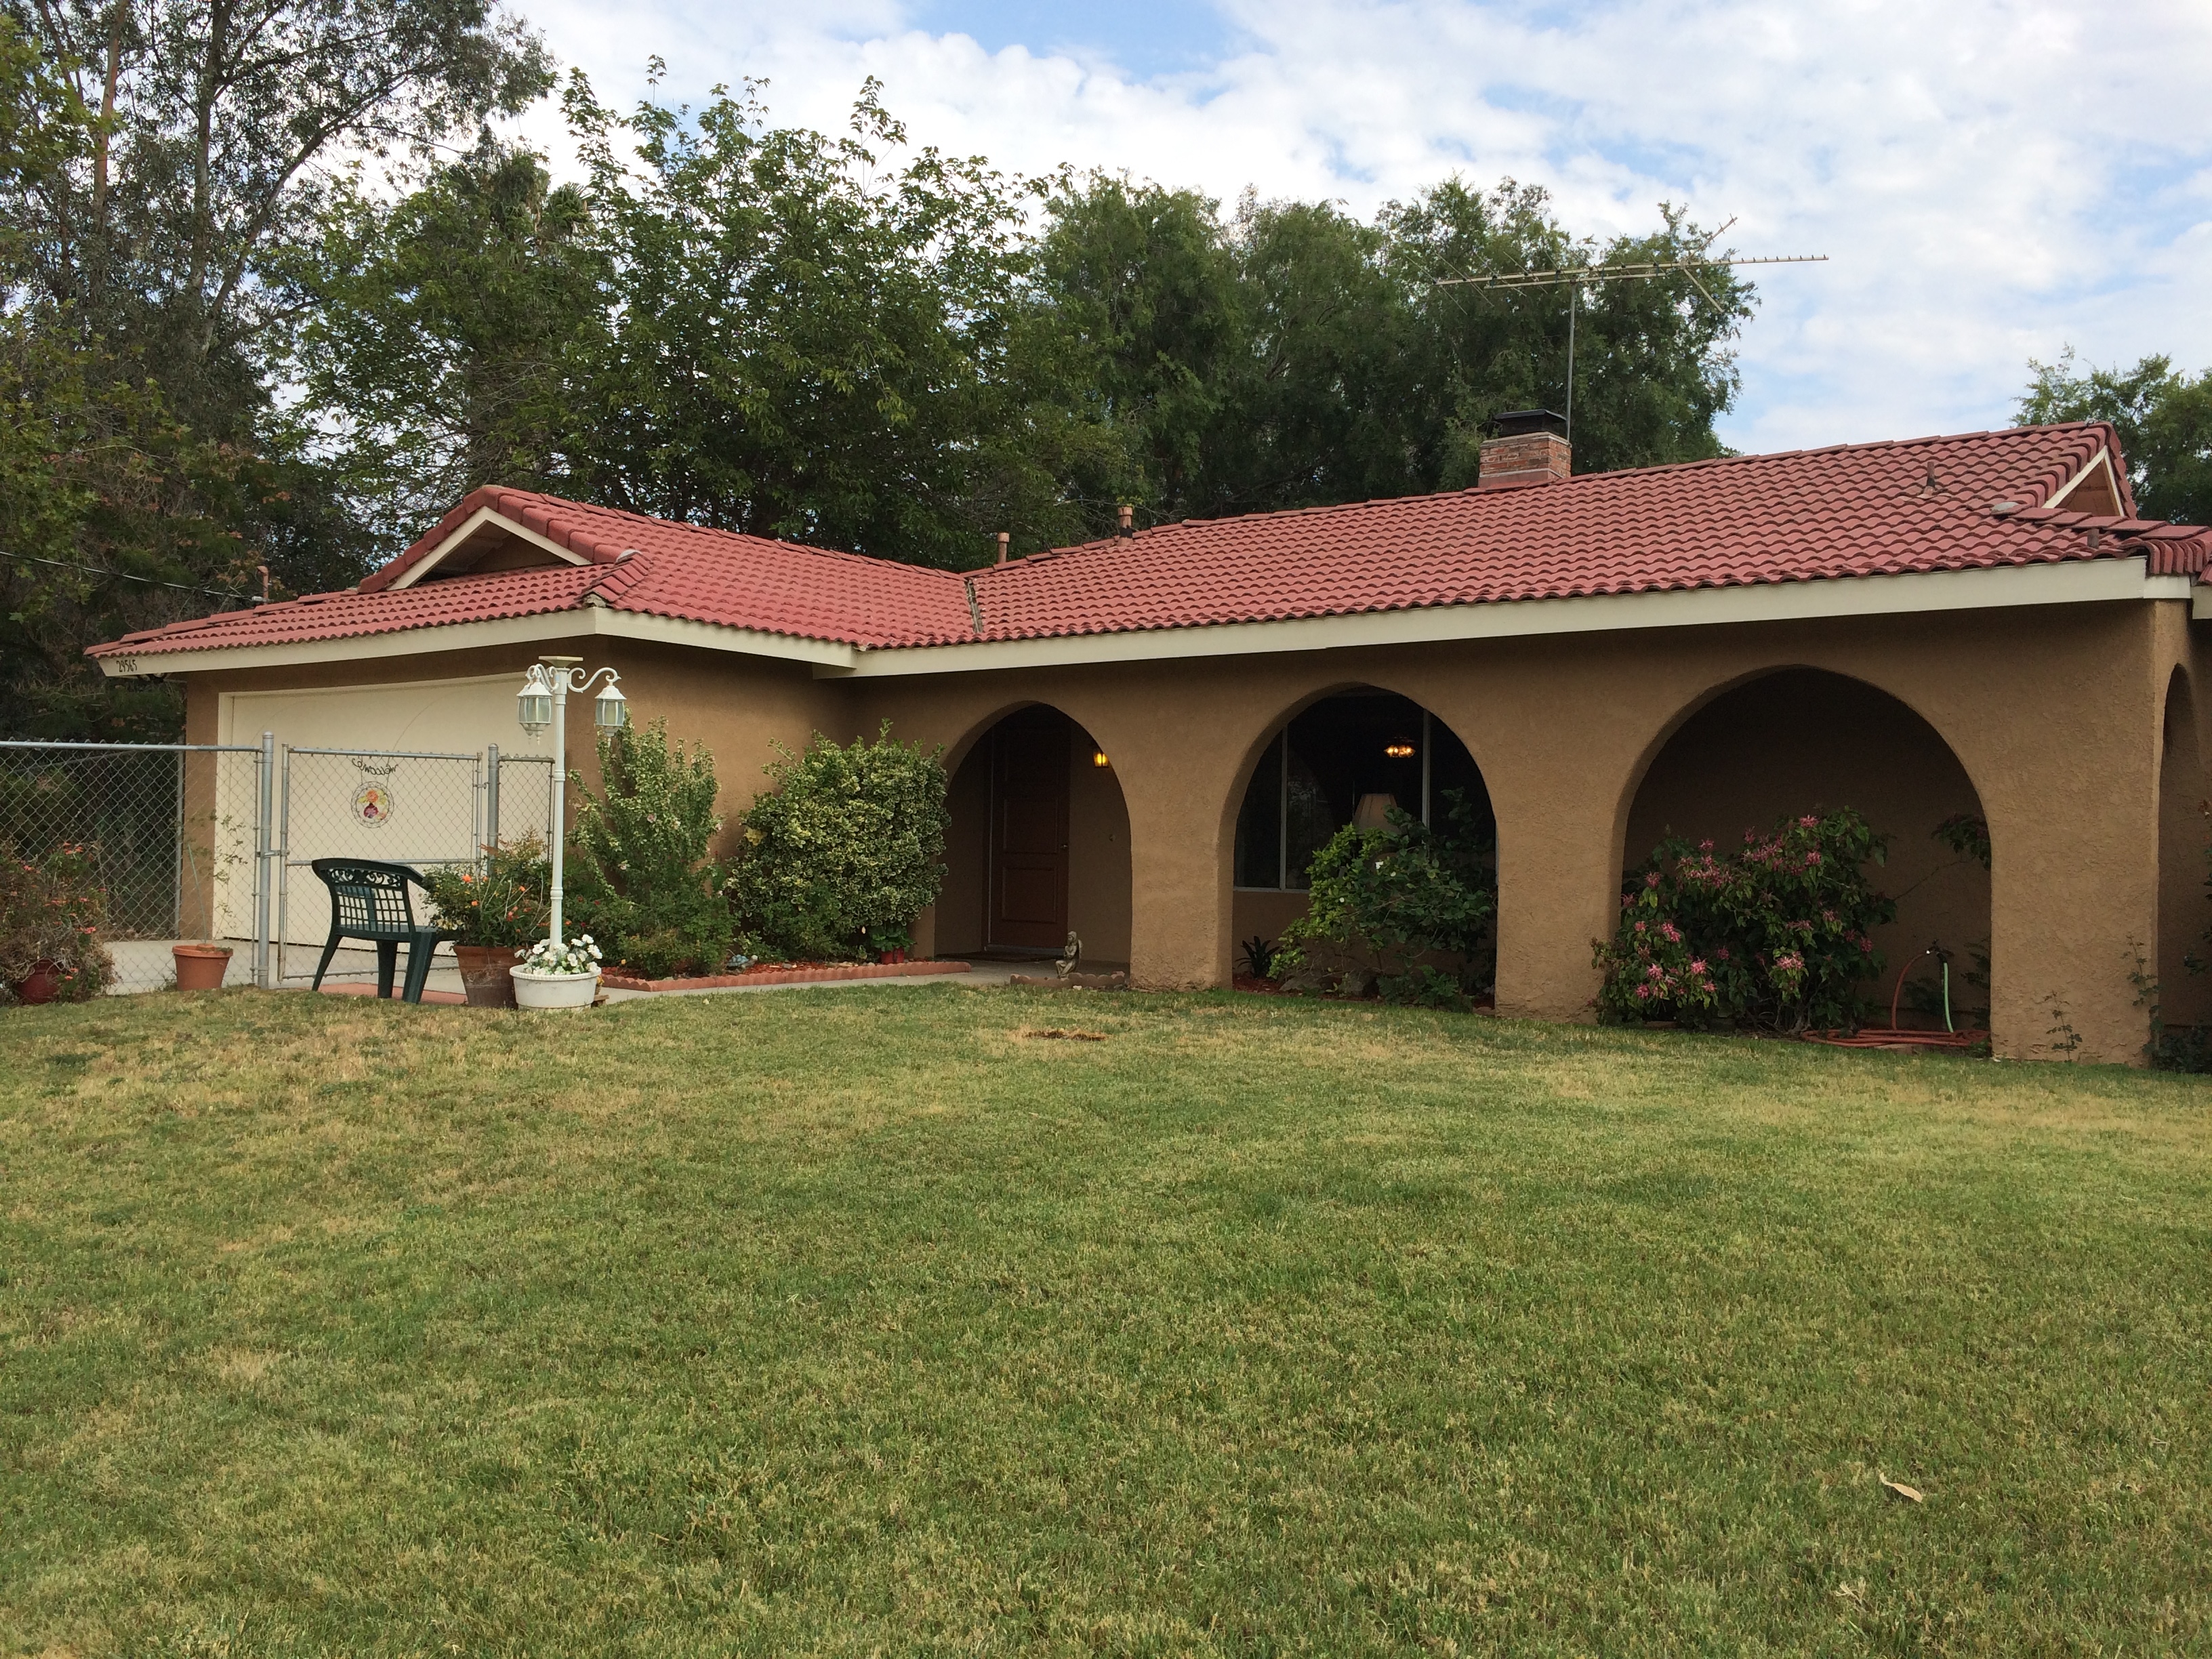 Menifee- 1.06 acre Horse Property - 1900 sq. ft. 6 stall Barn - Listed $ & SOLD in 3 days!